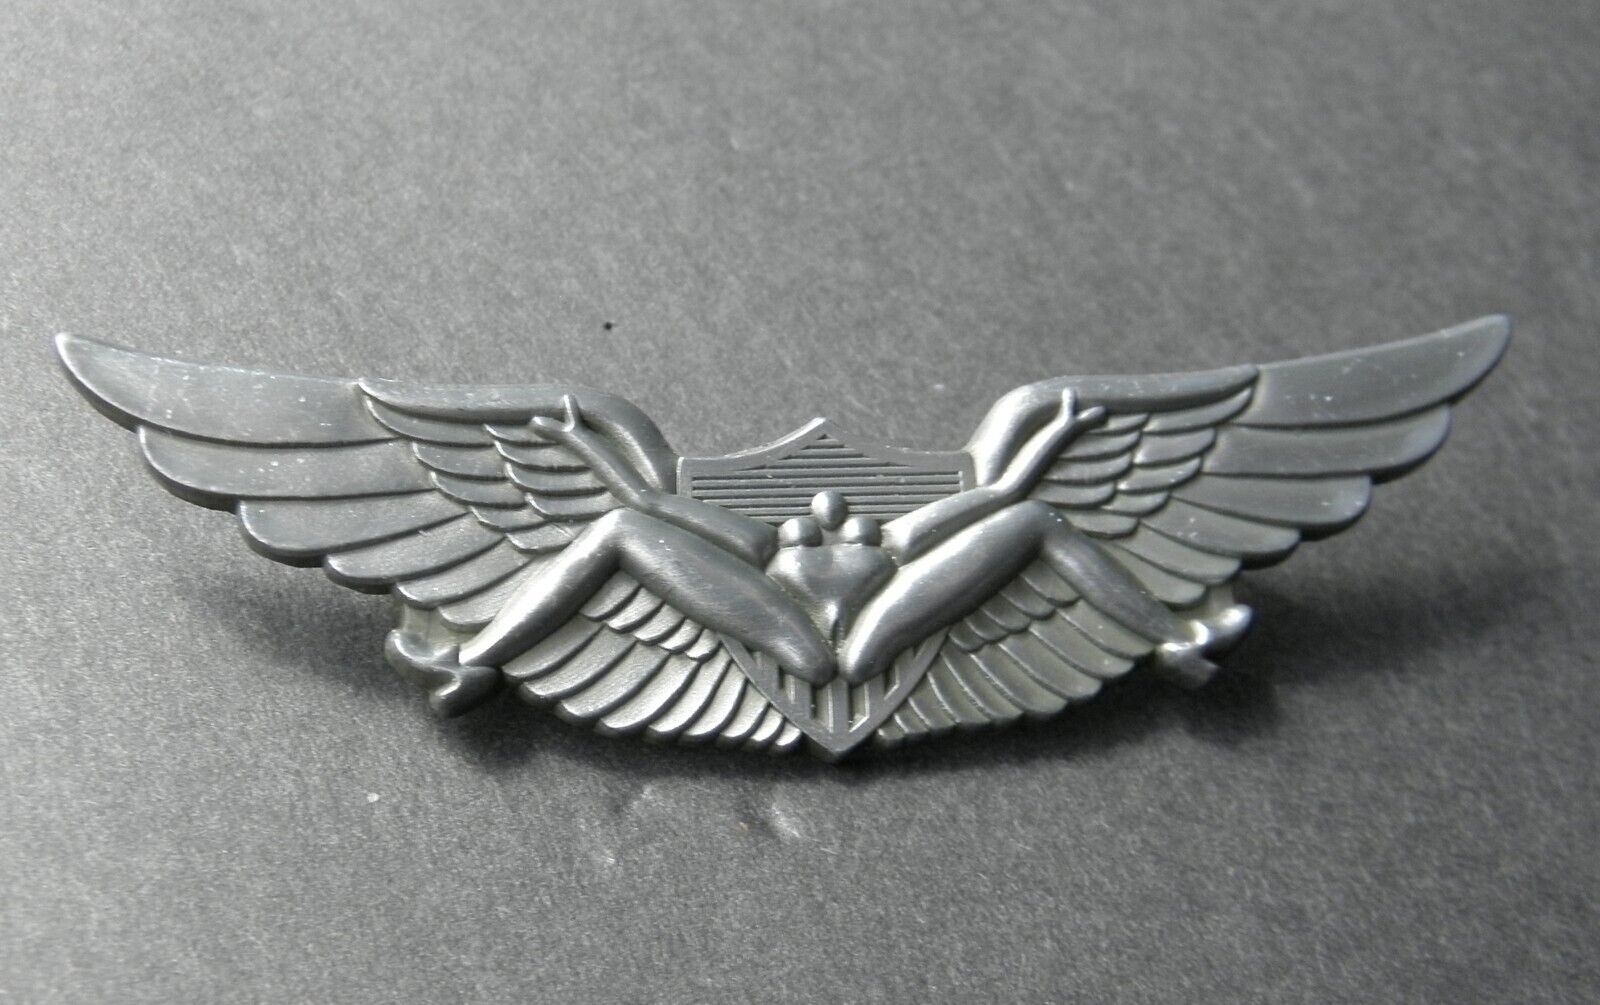 AIRBORNE ARMY AIR FORCE BUSH JUMP WINGS BADGE LAPEL PIN 2.75 INCHES